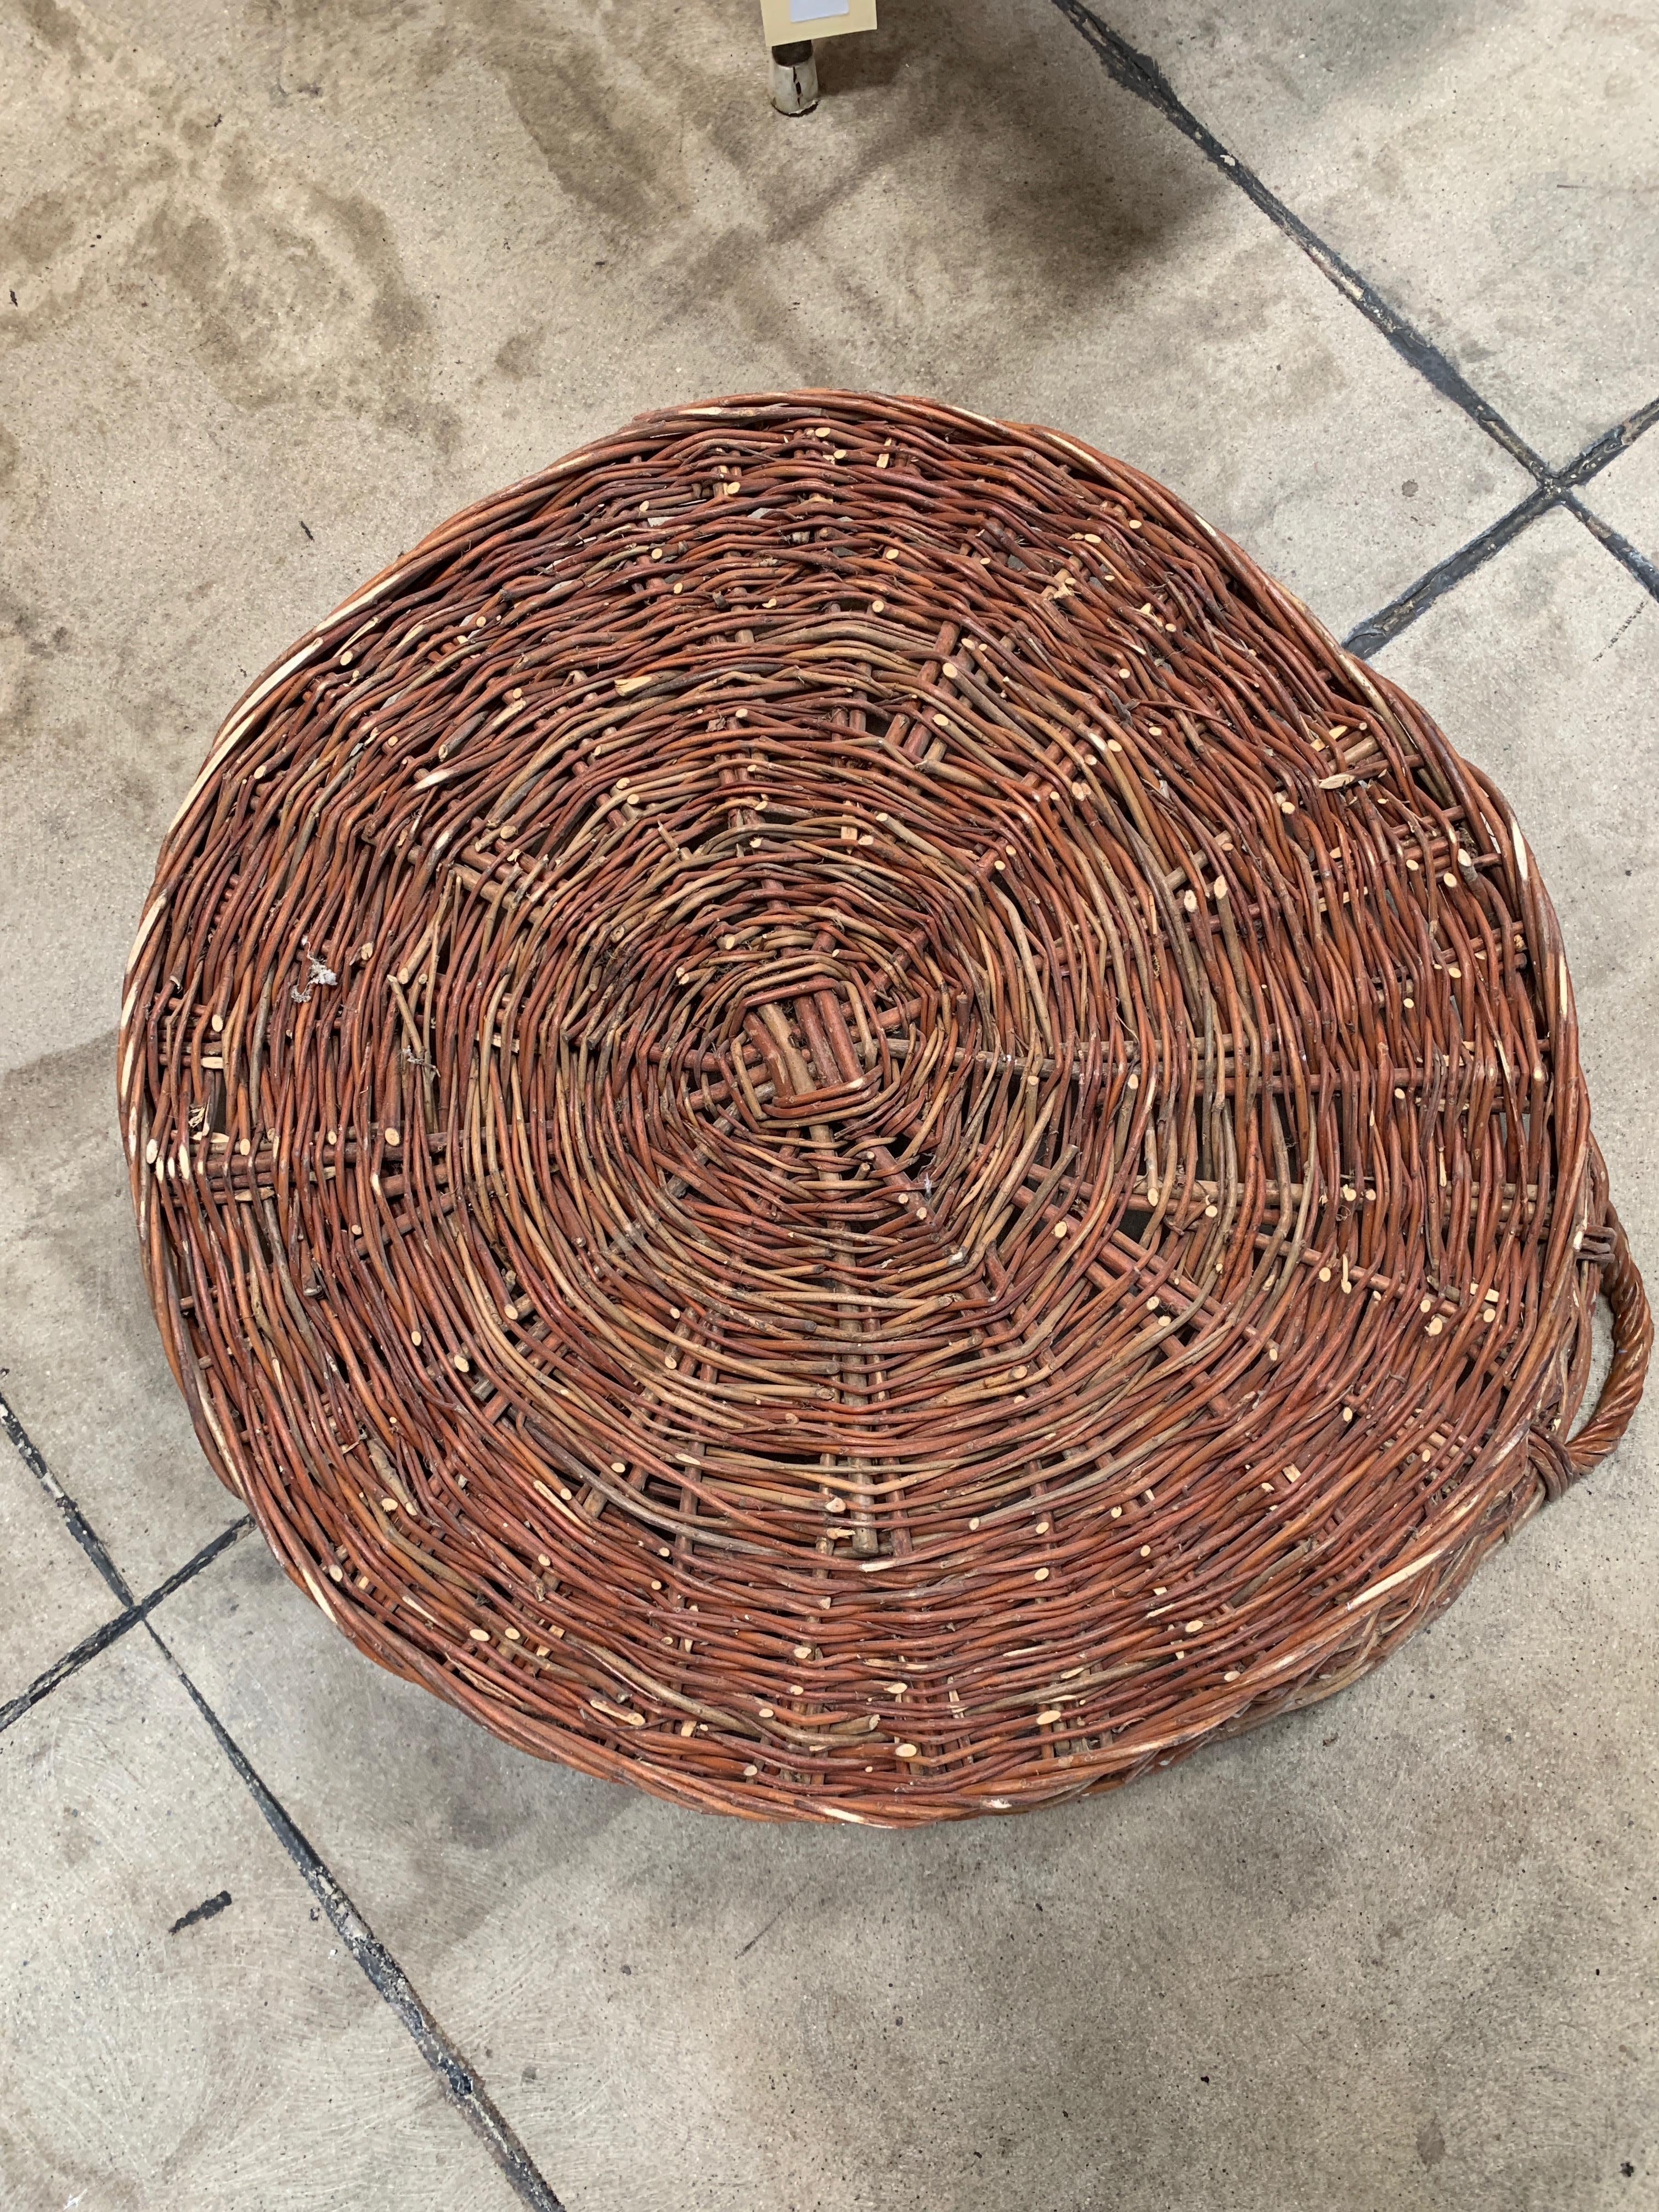 Versatile flat-woven basket from Europe. Makes a wonderful decoration but could also be used to collect from your garden or as a storage piece! Measures: 26